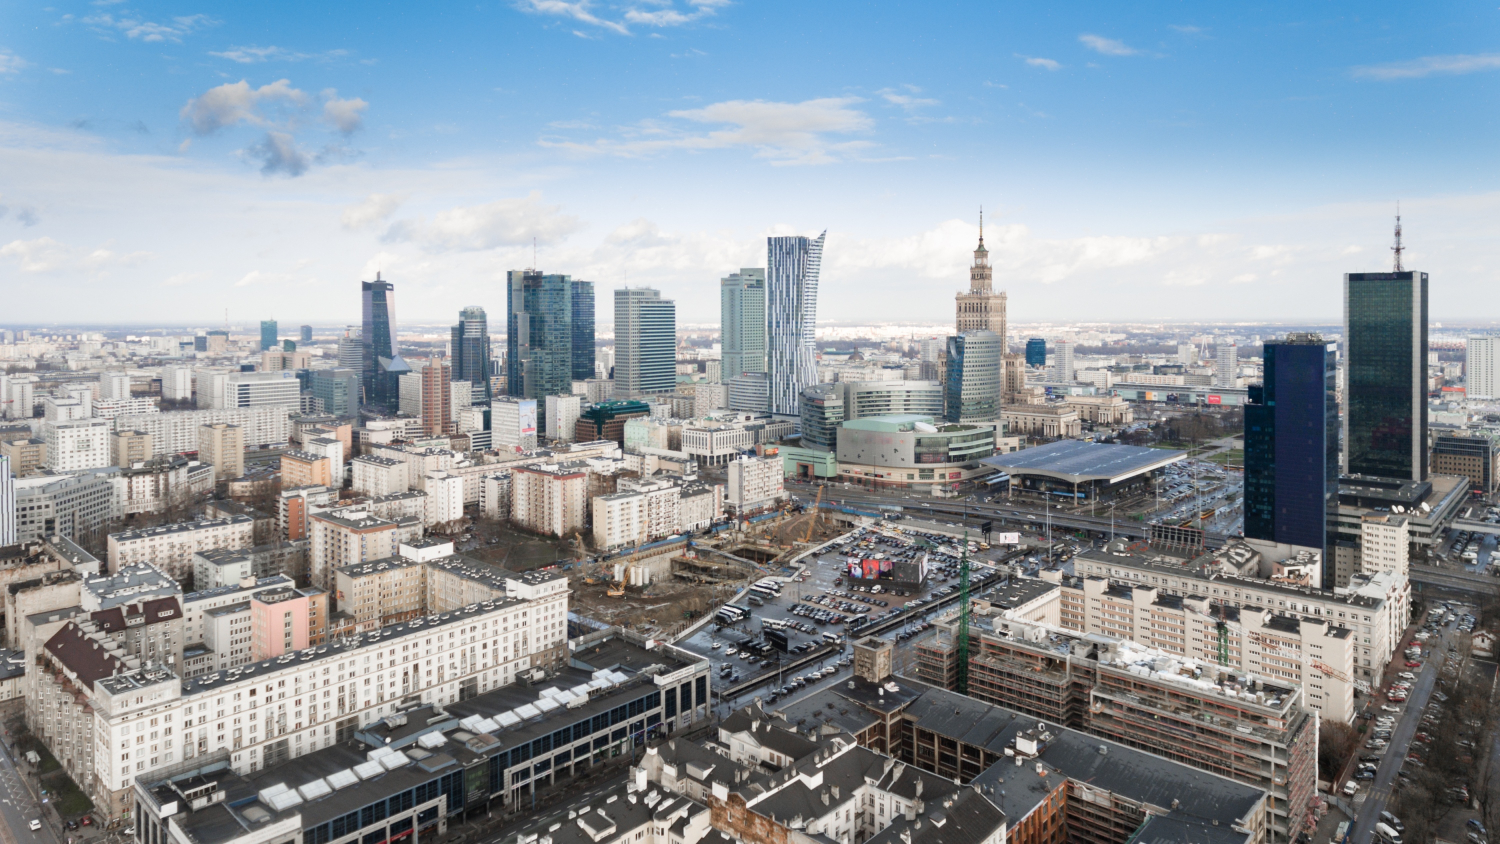 News Article cities Colliers Poland report ULI urban planning